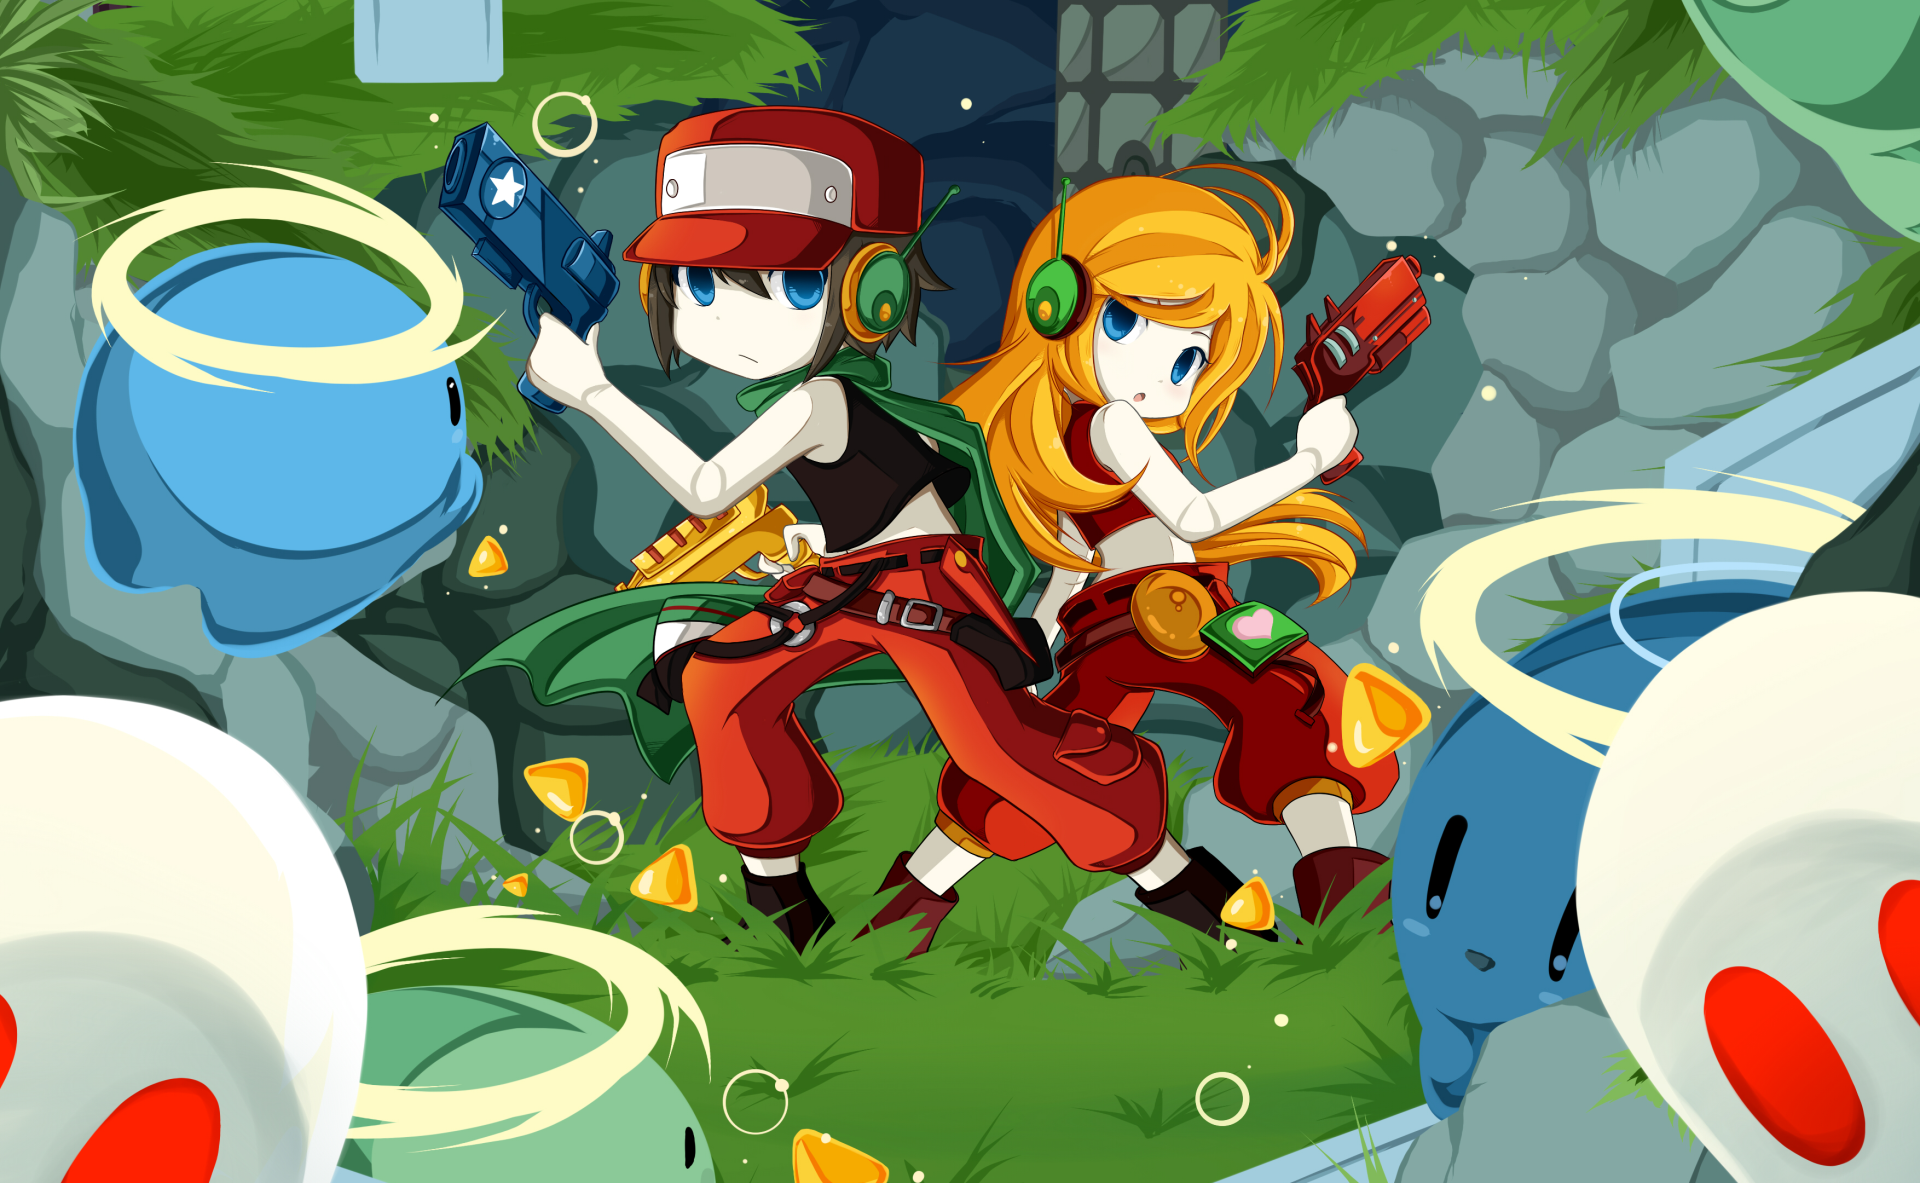 Free download classic Indie game - Cave Story - Photo 2.